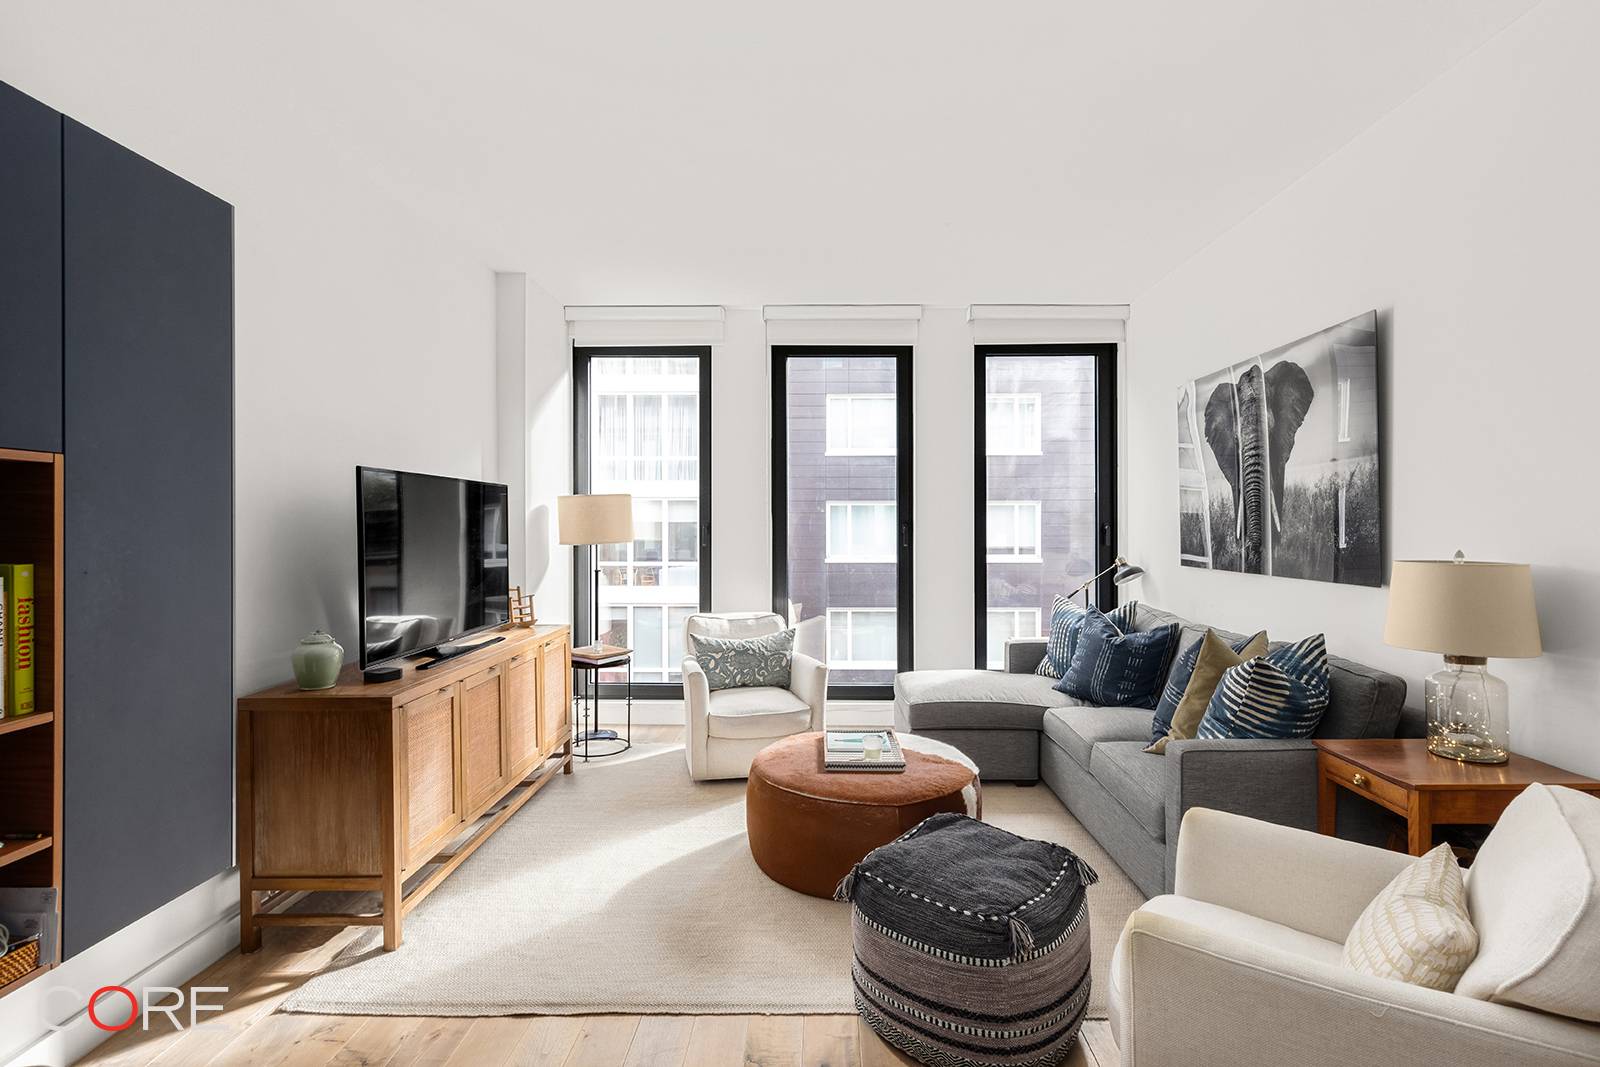 This east facing two bedroom, two and a half bathroom apartment presents 1, 073 square feet of living space at 15 Renwick.